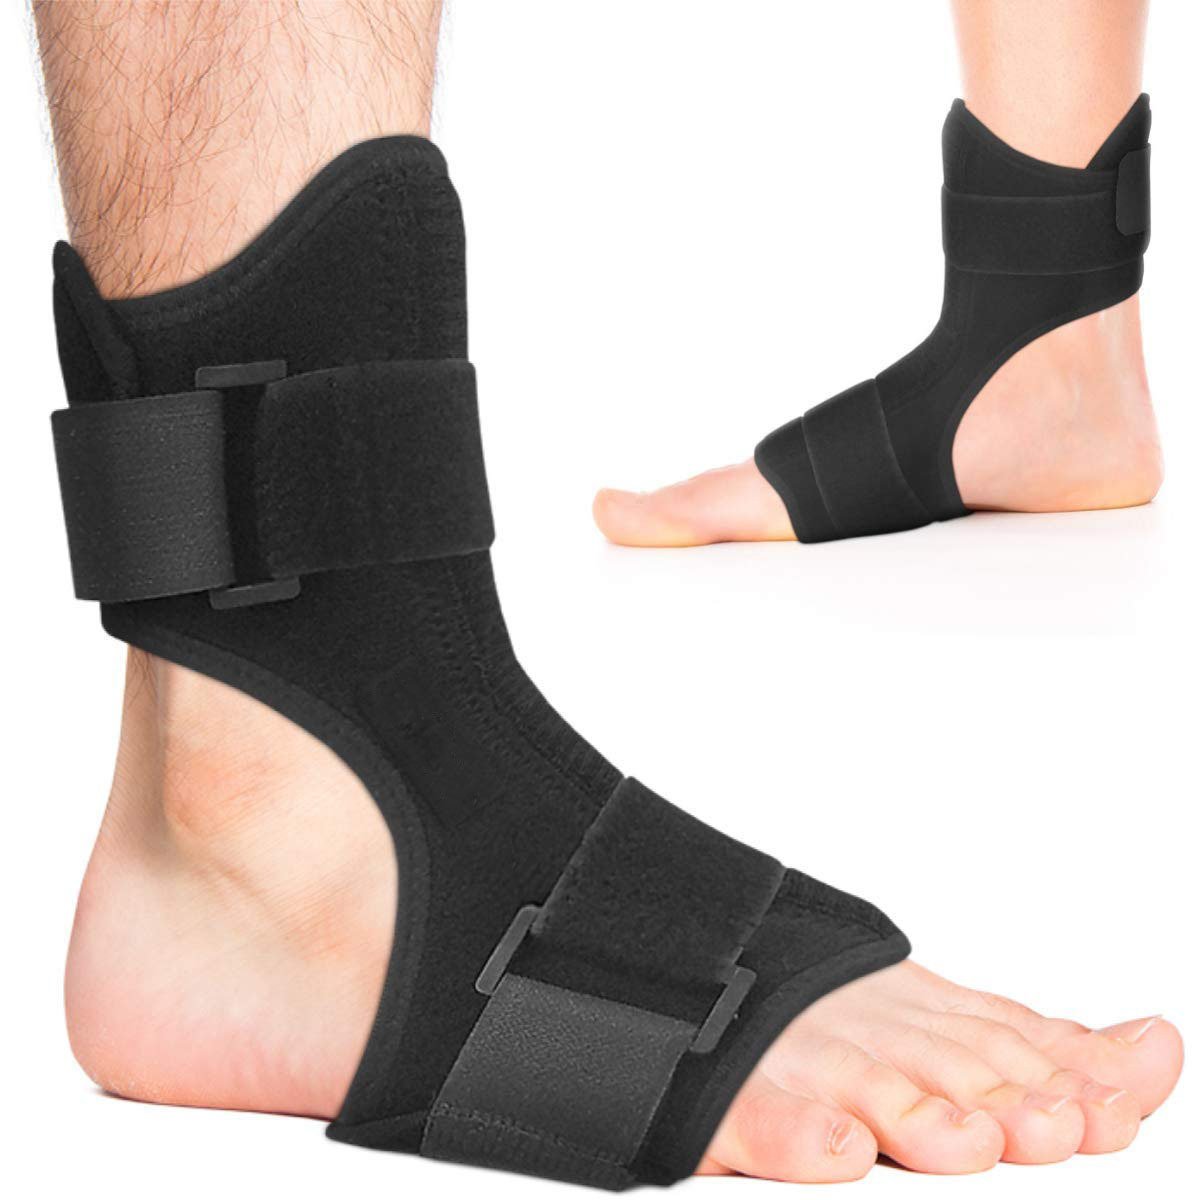 Medical ankle joint fixation foot brace